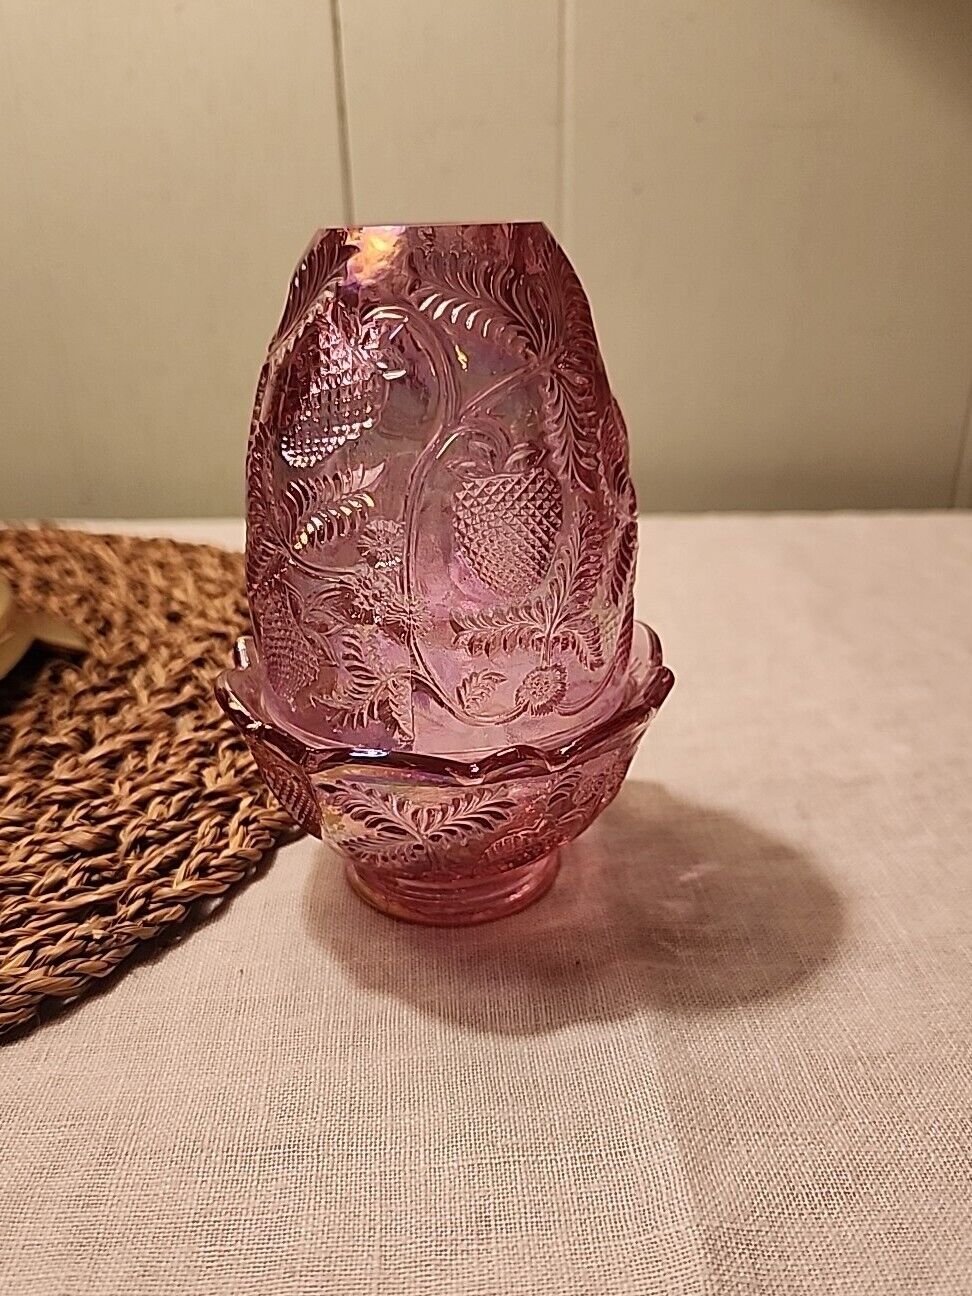 Fenton Irridescent Pink Cranberry  Inverted  Strawberry Fairy Lamp, 90's